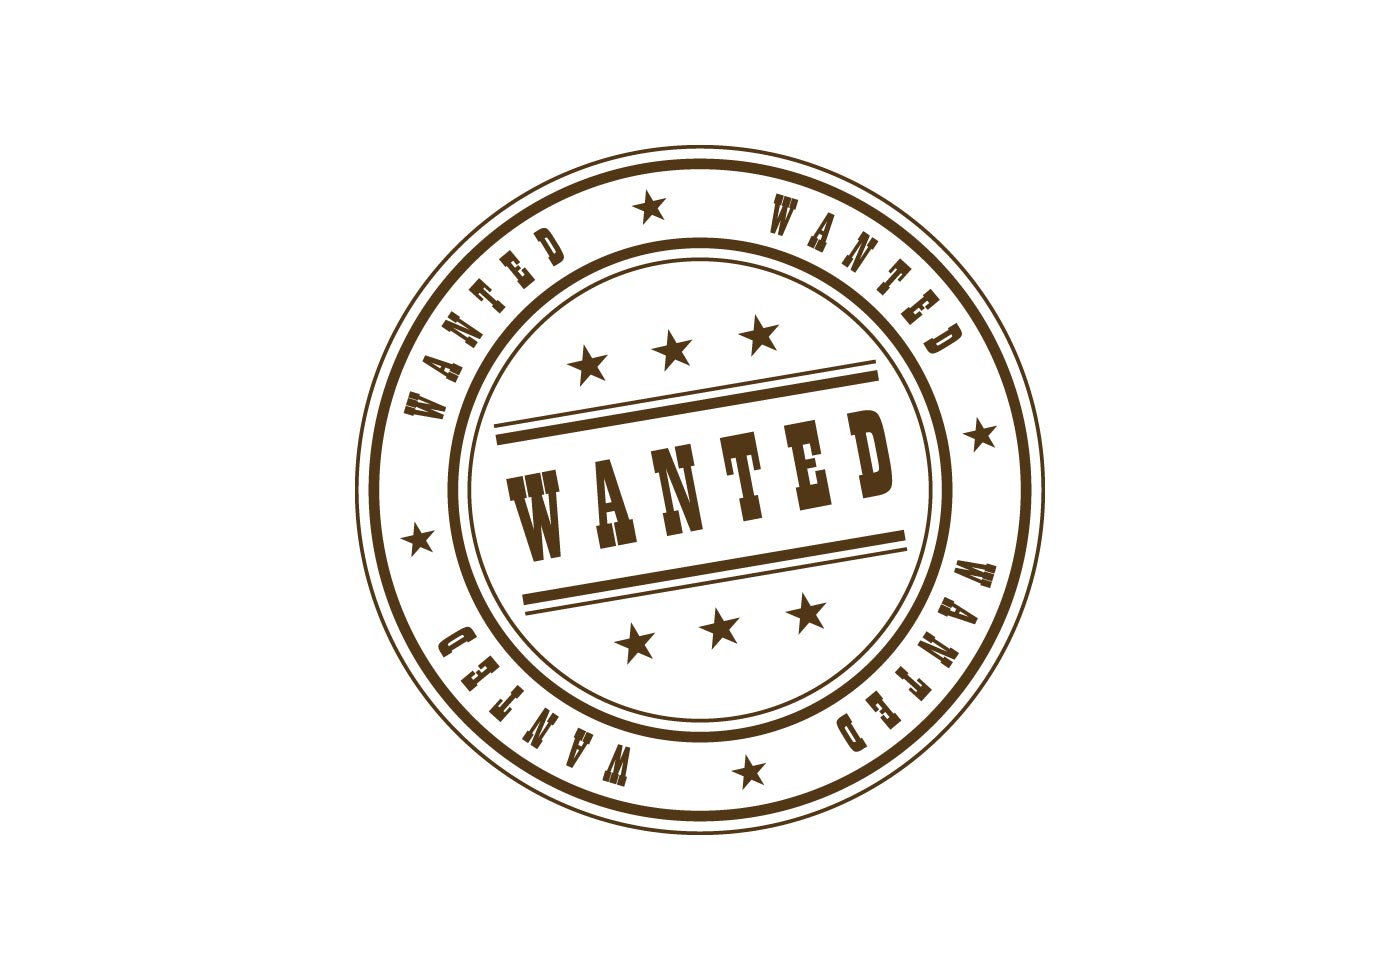 Wanted Stamp - Download Free Vector Art, Stock Graphics & Images